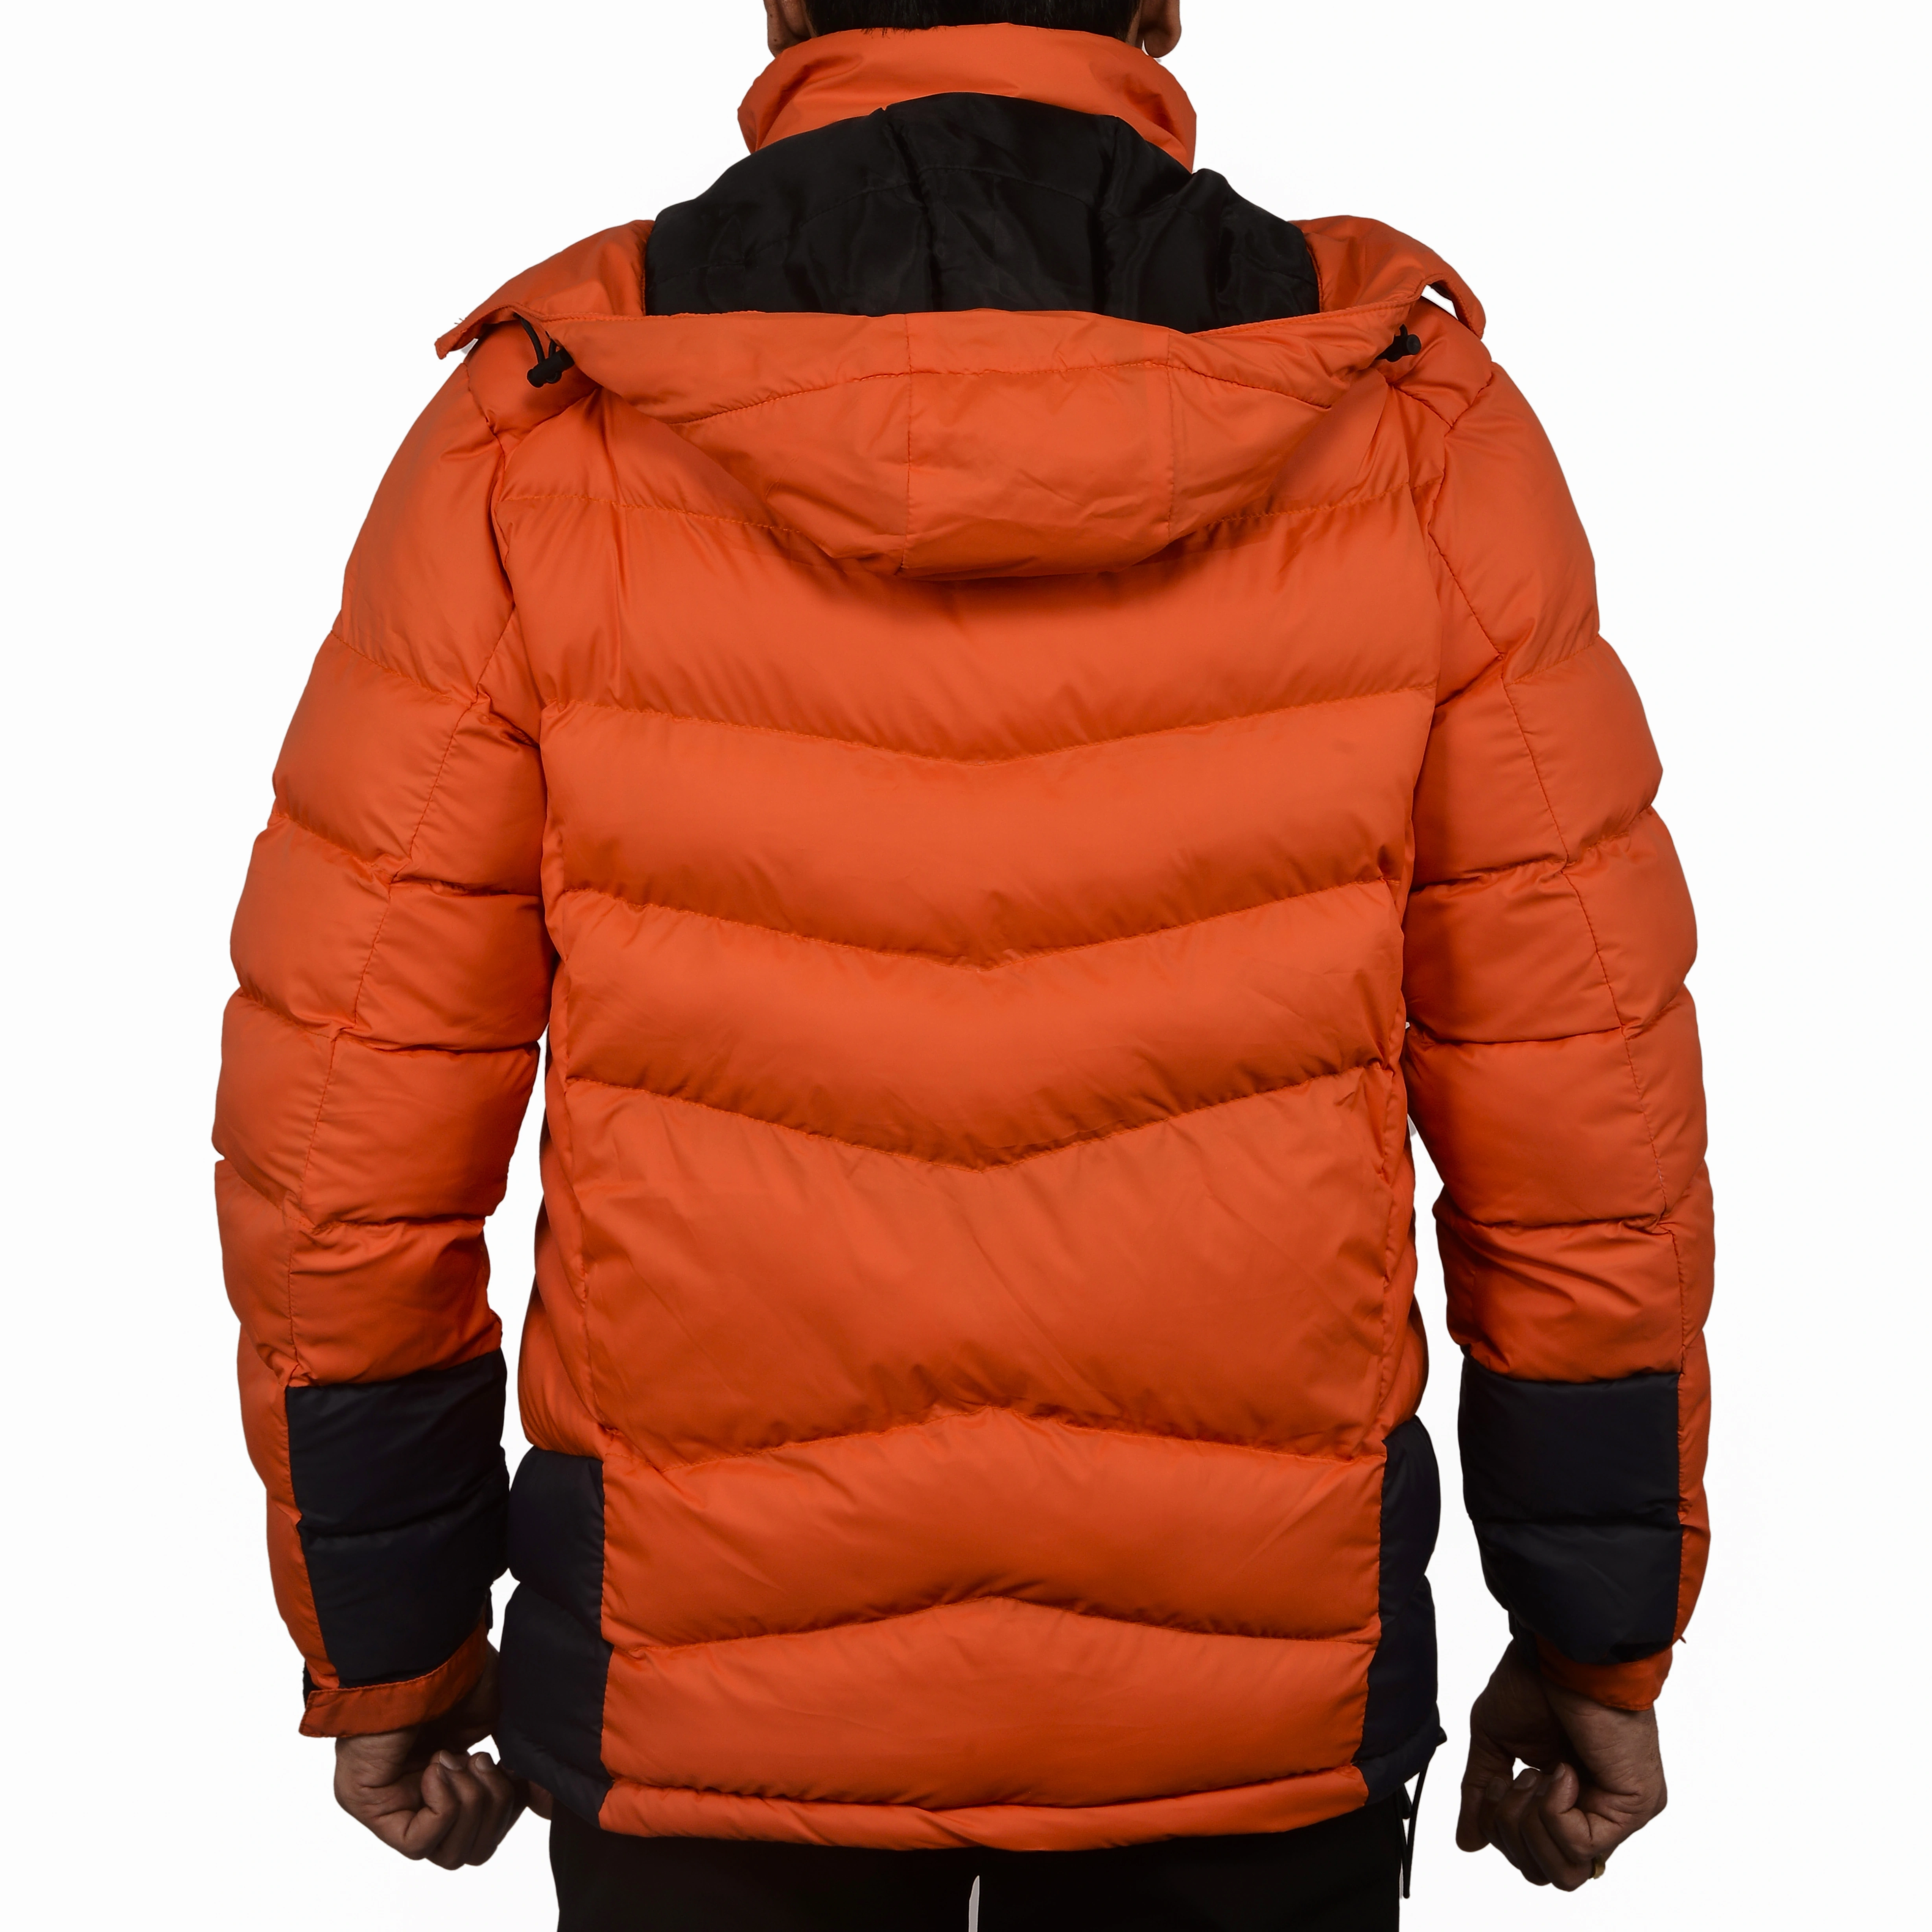 K2 Survivor Down Jacket for Men: Stylized Functionality for Extreme Cold Weather Expeditions (Up to -20°C)-3XL-Orange-4